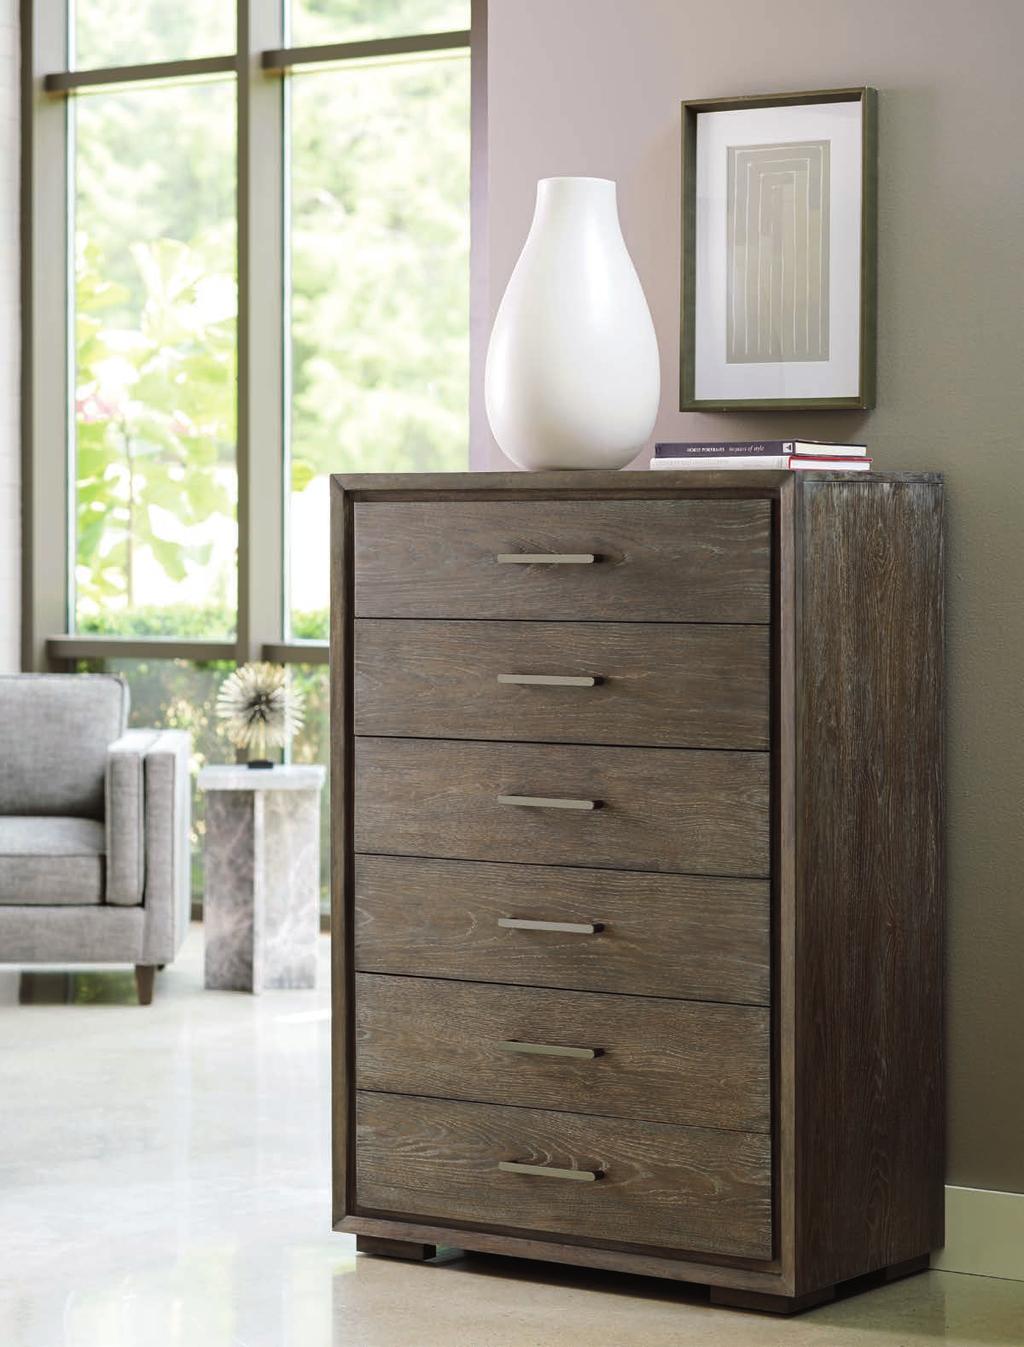 The 66-inch Cambia double dresser offers ample storage in two banks of soft-close drawers.